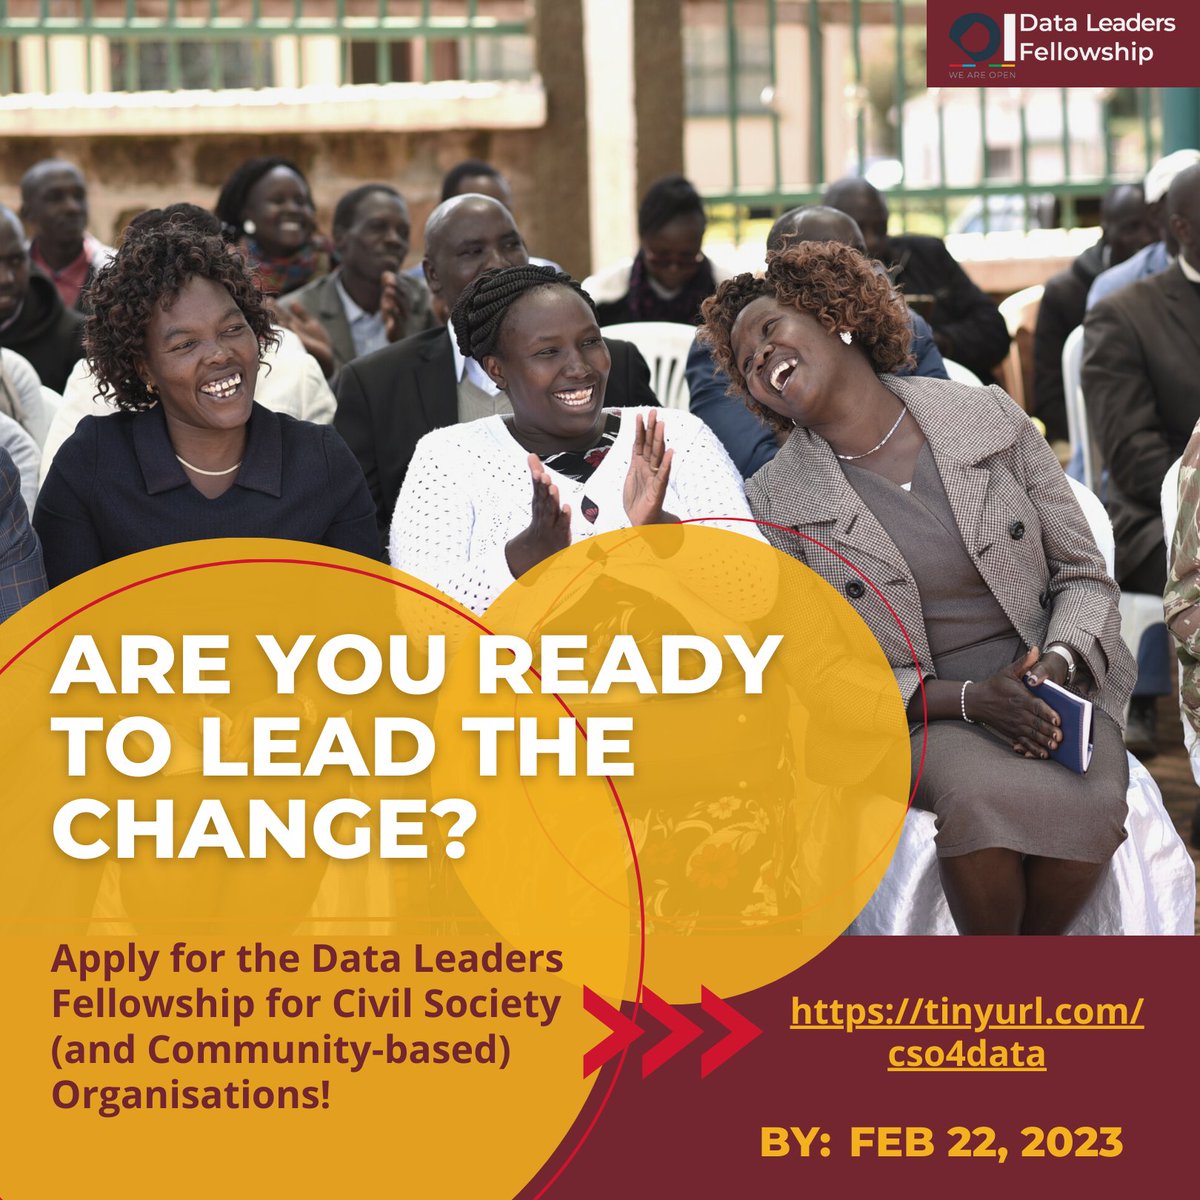 🌟Exciting news!🌟 The #DataLeaders Fellowship is back, this time for CSOs/CBOs passionate about data! If your CSO has been keen to use data to promote public participation & track county performance, what are you waiting for? Apply today 👉🏾 tinyurl.com/csos4data 
#Data4Dev